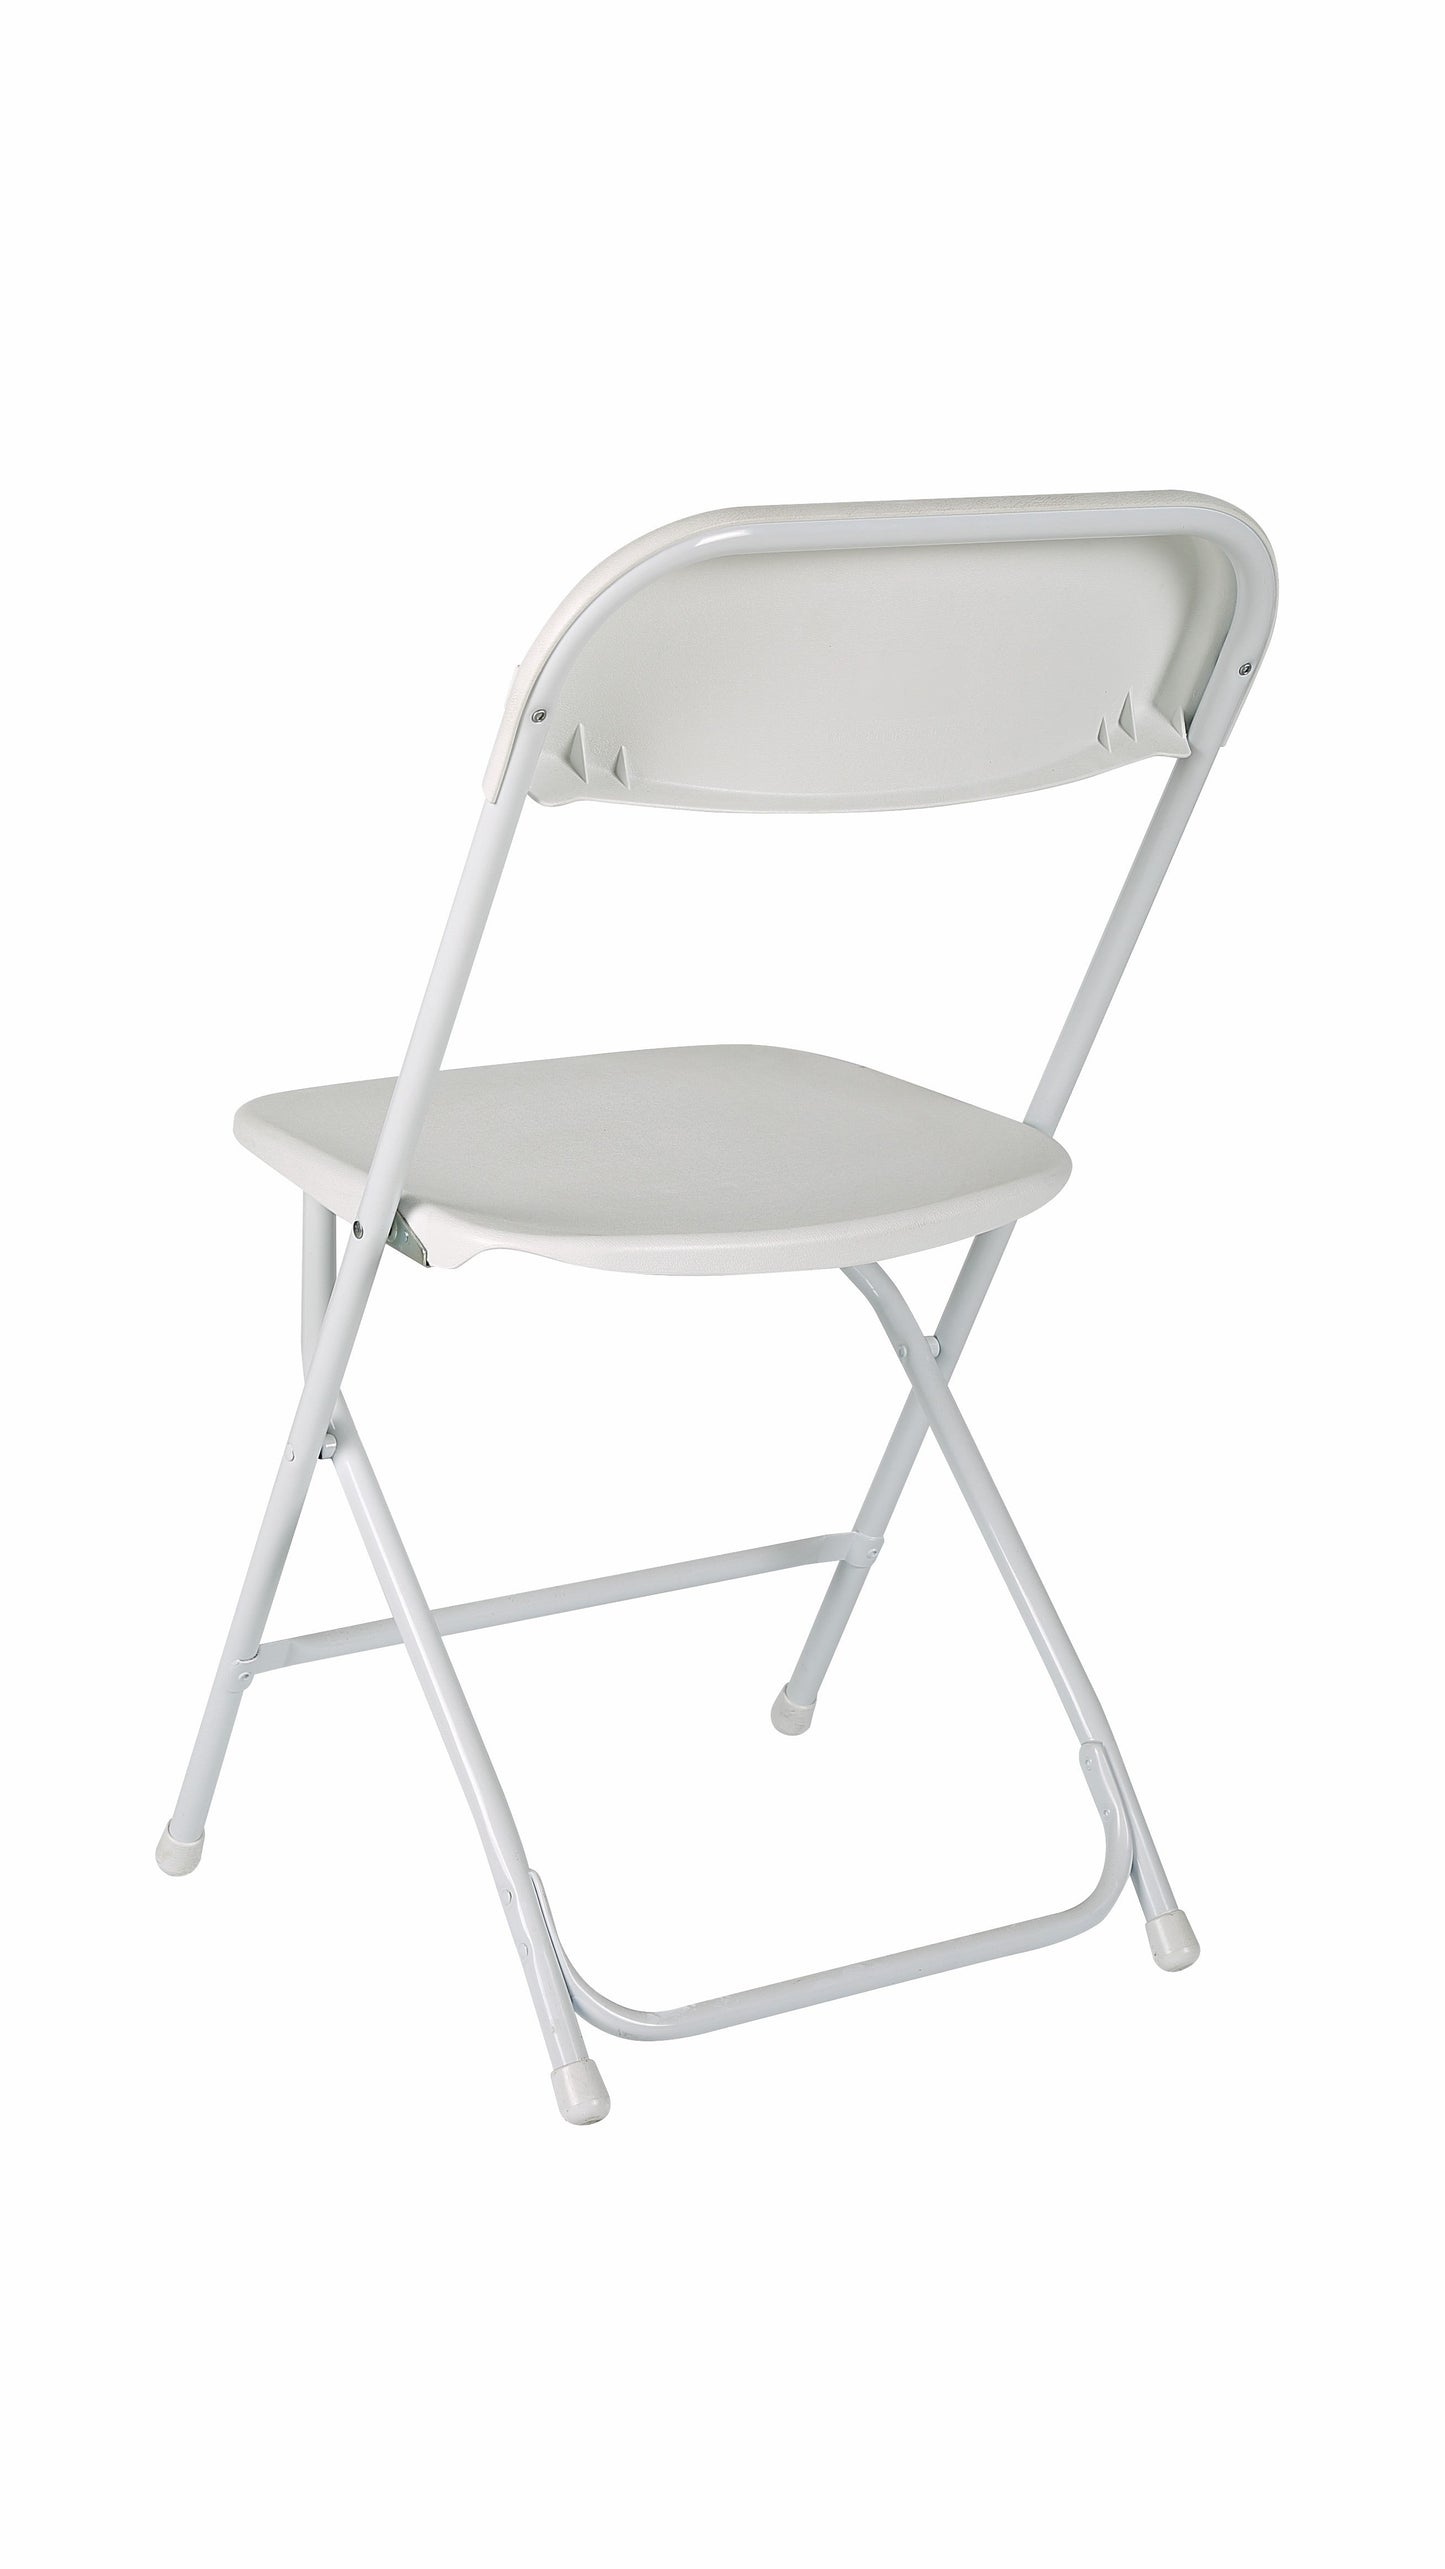 | SPECIAL DEAL | Heavy Duty White Plastic Folding Chairs (Box of 8)